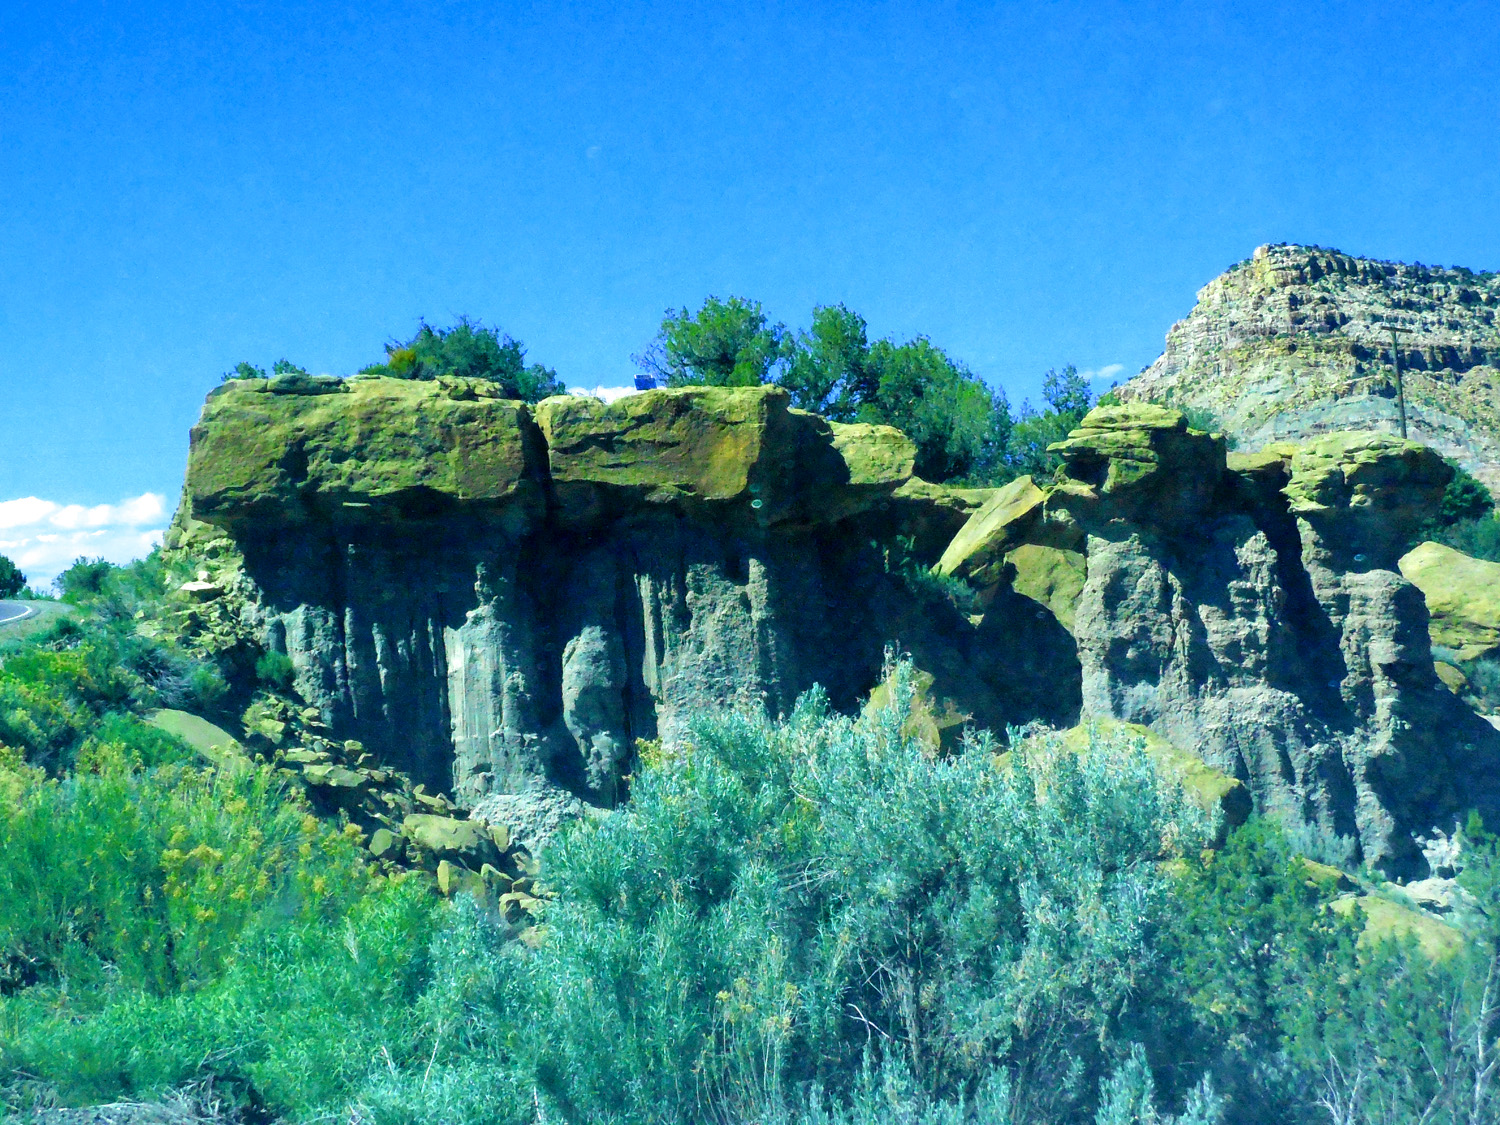 Wasatch Formation